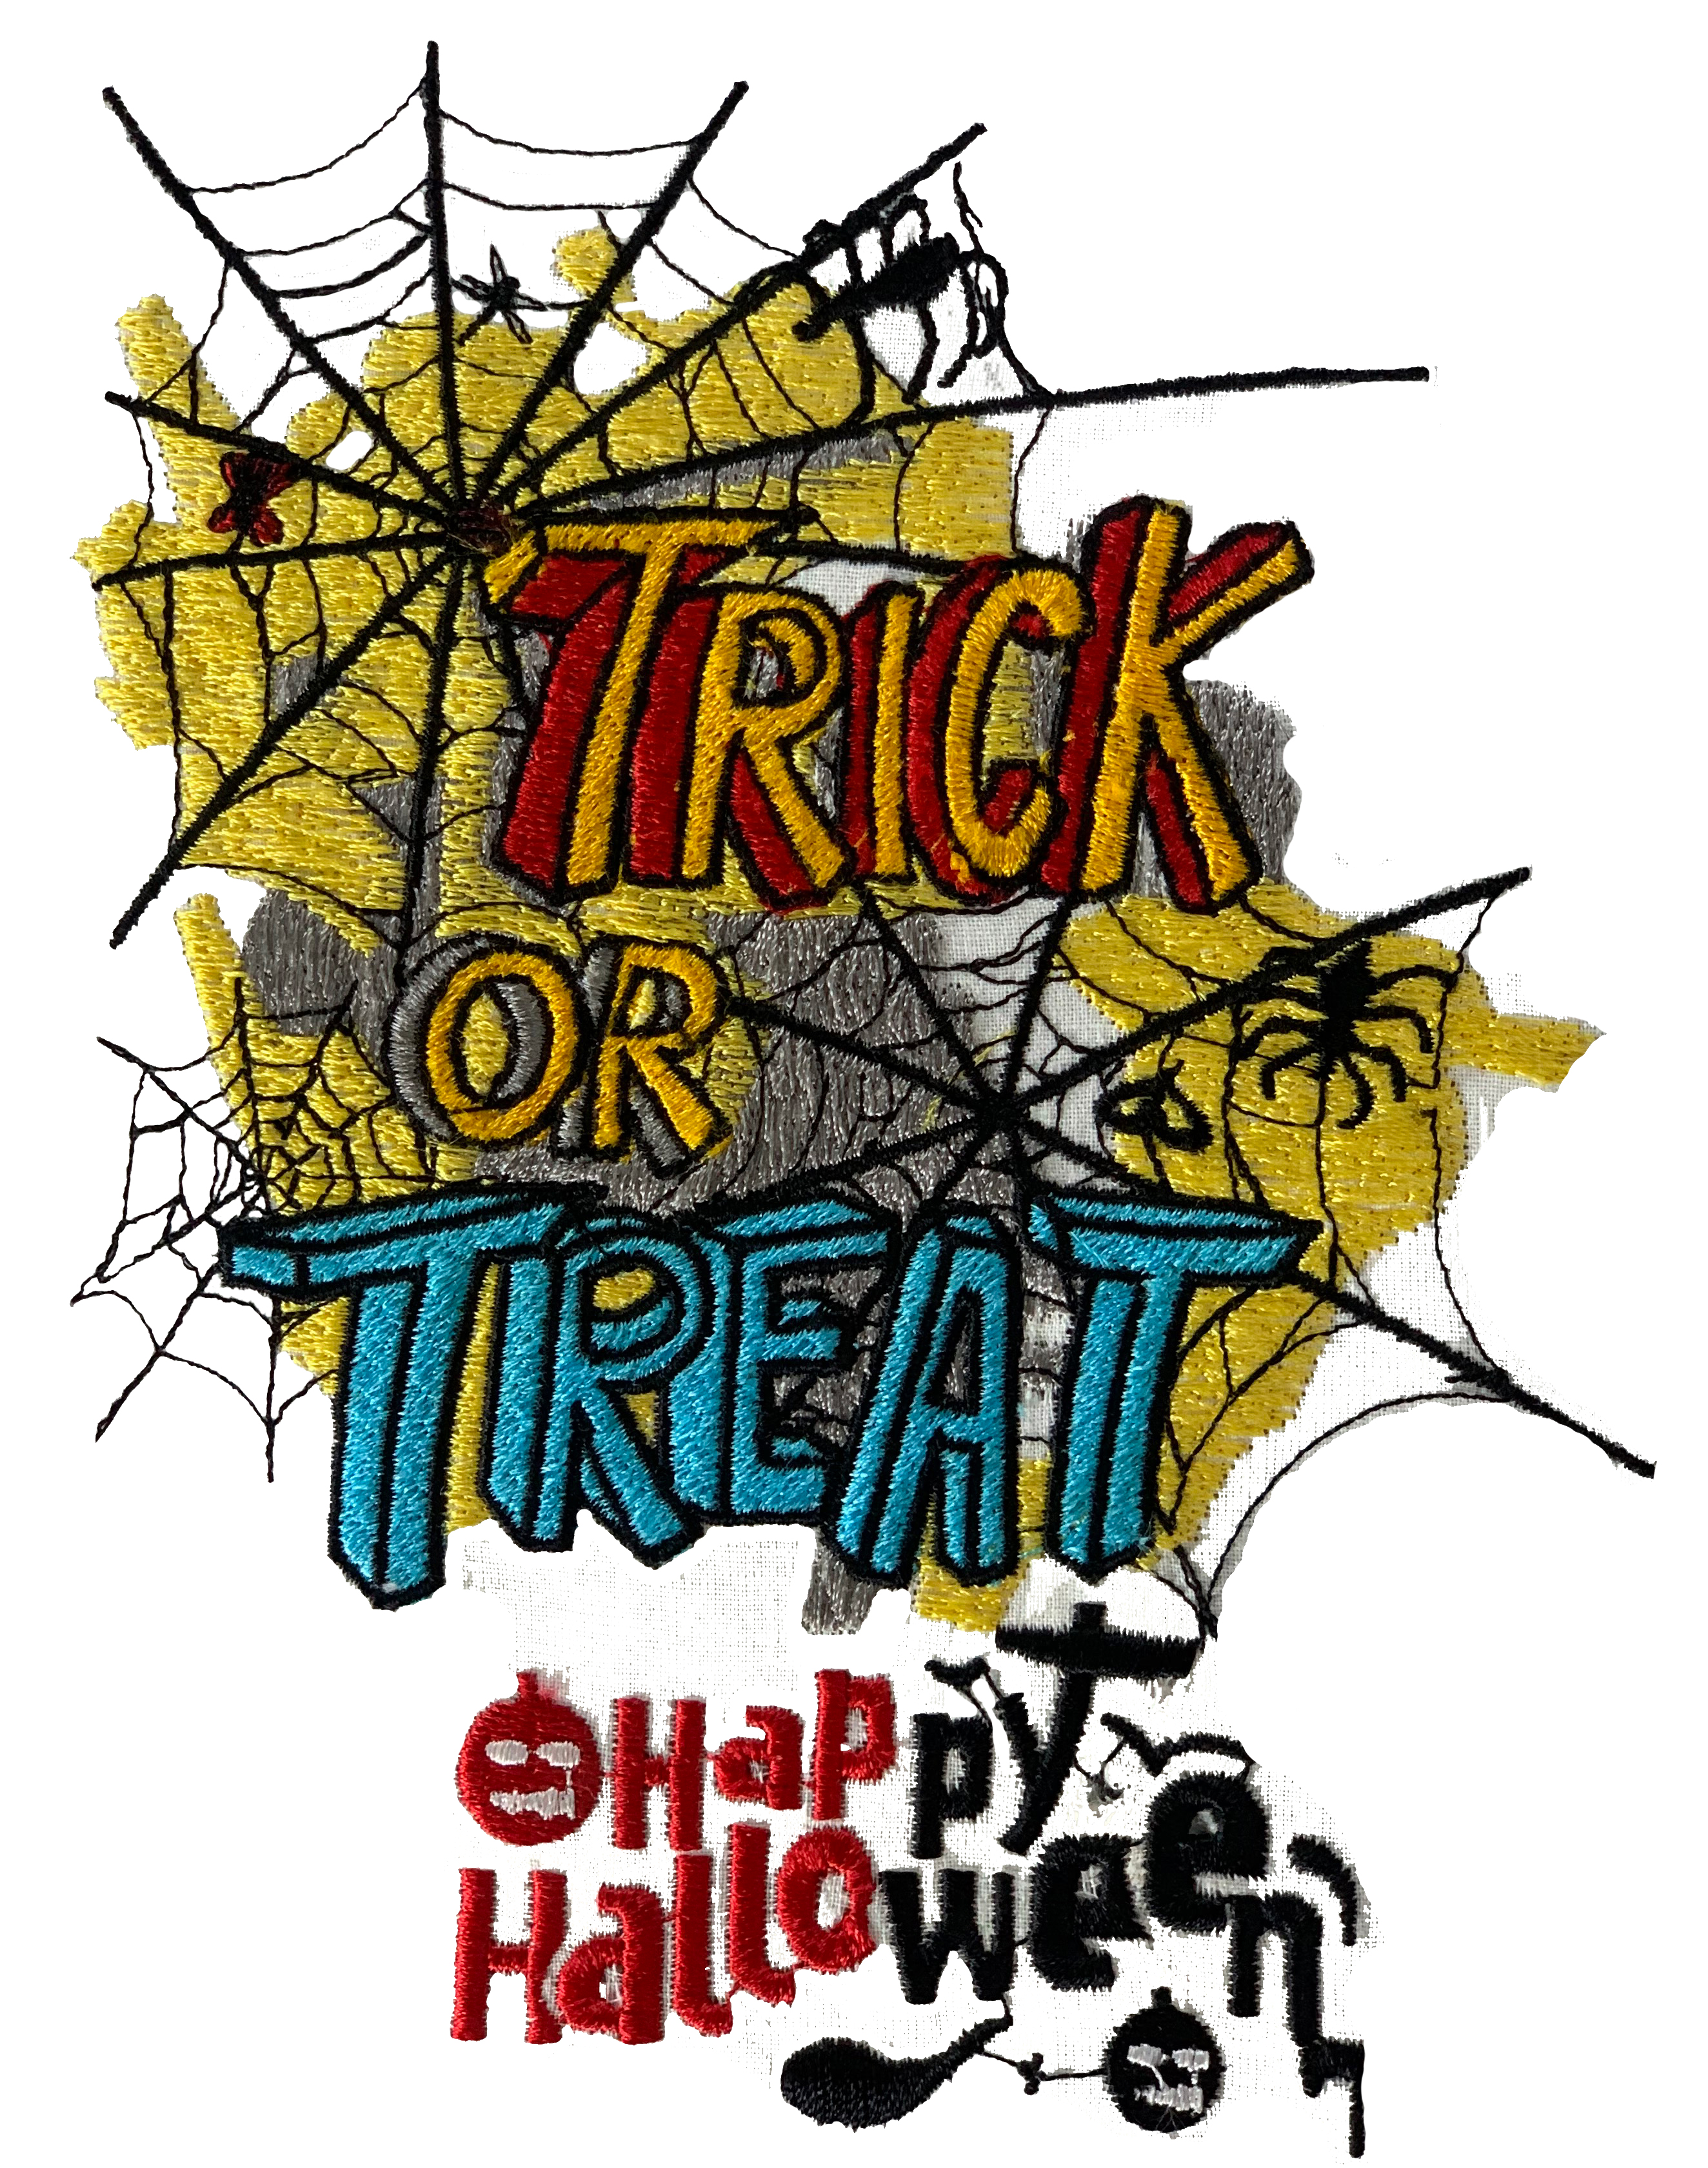 Trick Treat Text Halloween Poster Embroidery design with spider net background